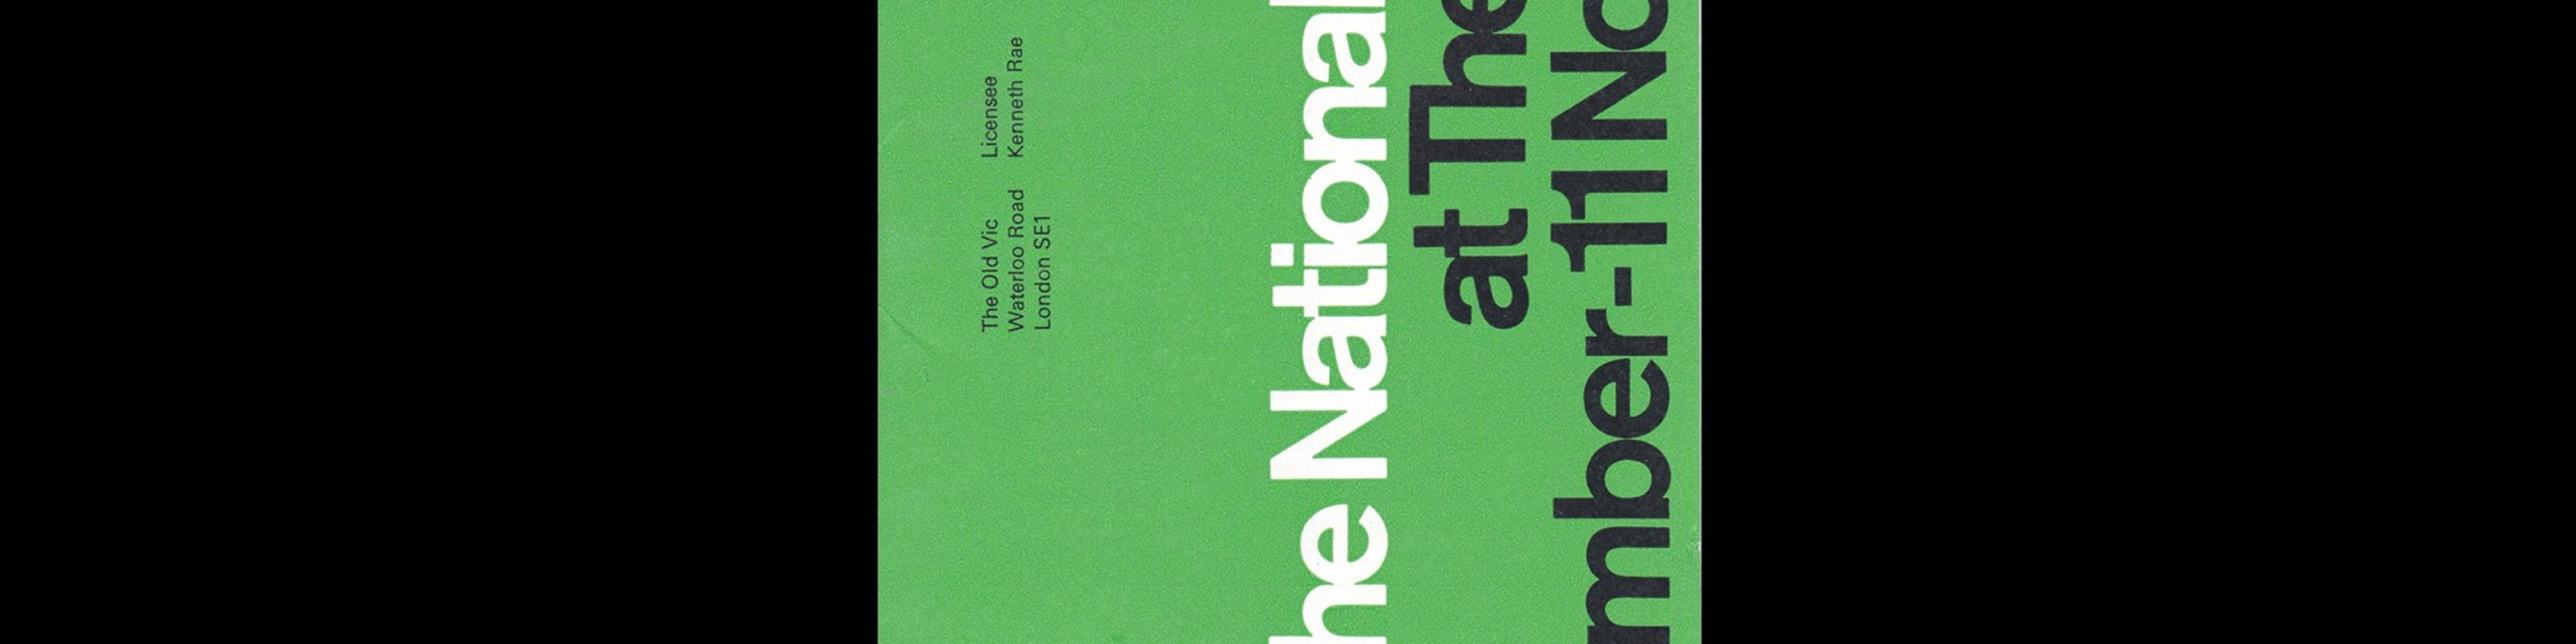 The National Theatre 1967/68 Booking Period Programme. Designed by Ken Briggs